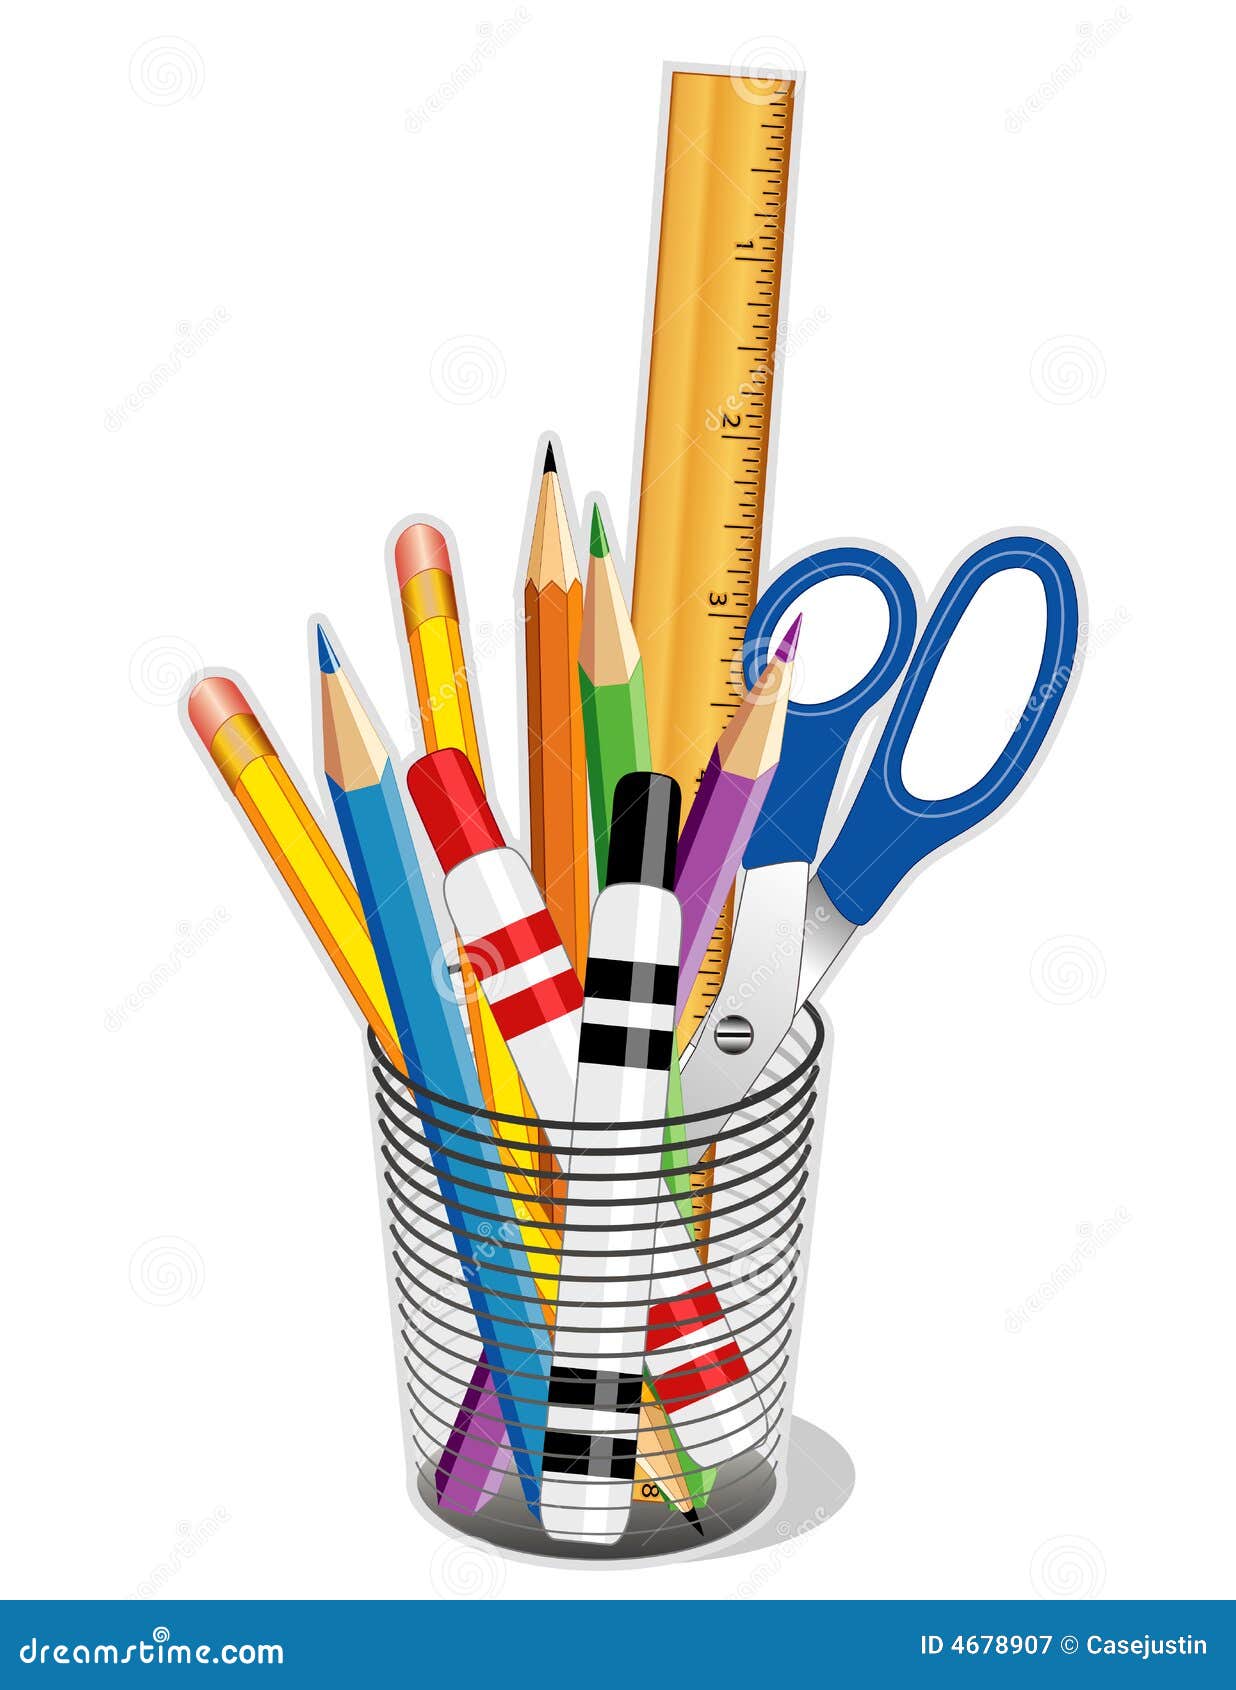 clipart writing tools - photo #6